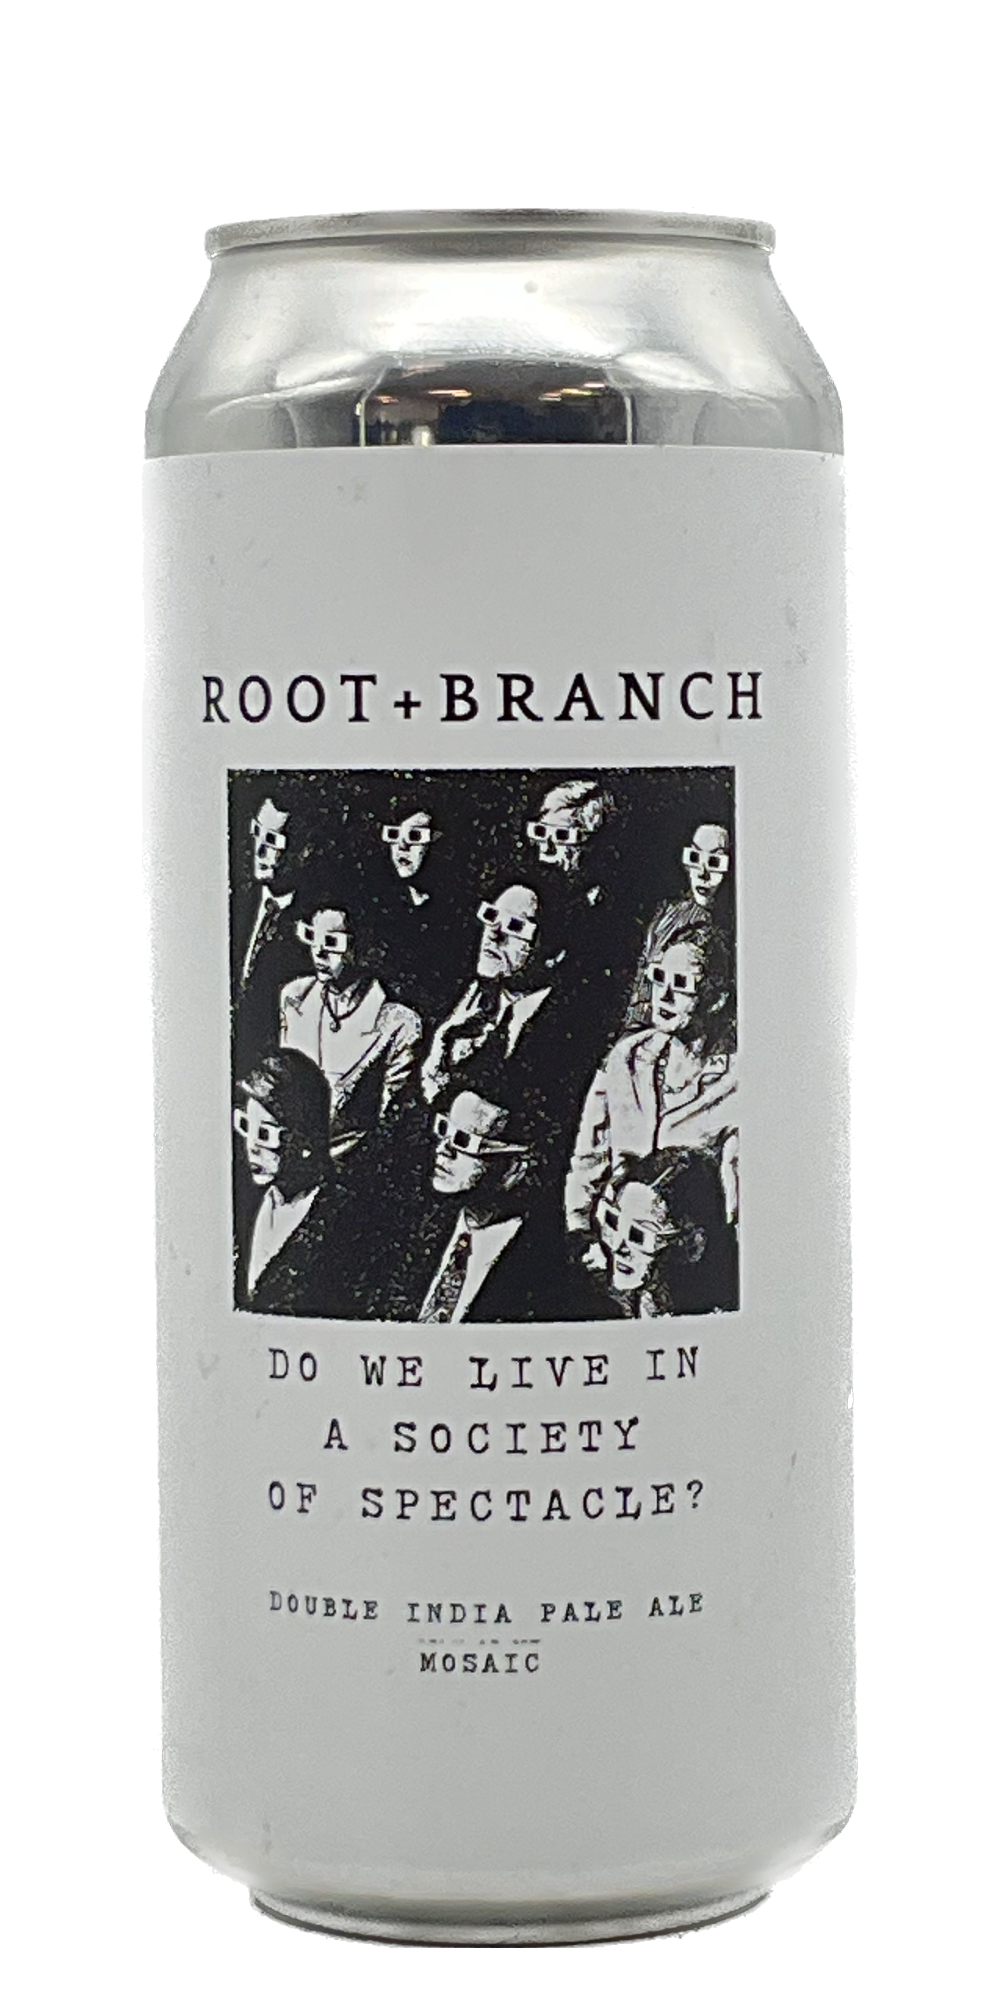 Root & Branch - Do We Live in a Society of Spectacle? (Mosaic)